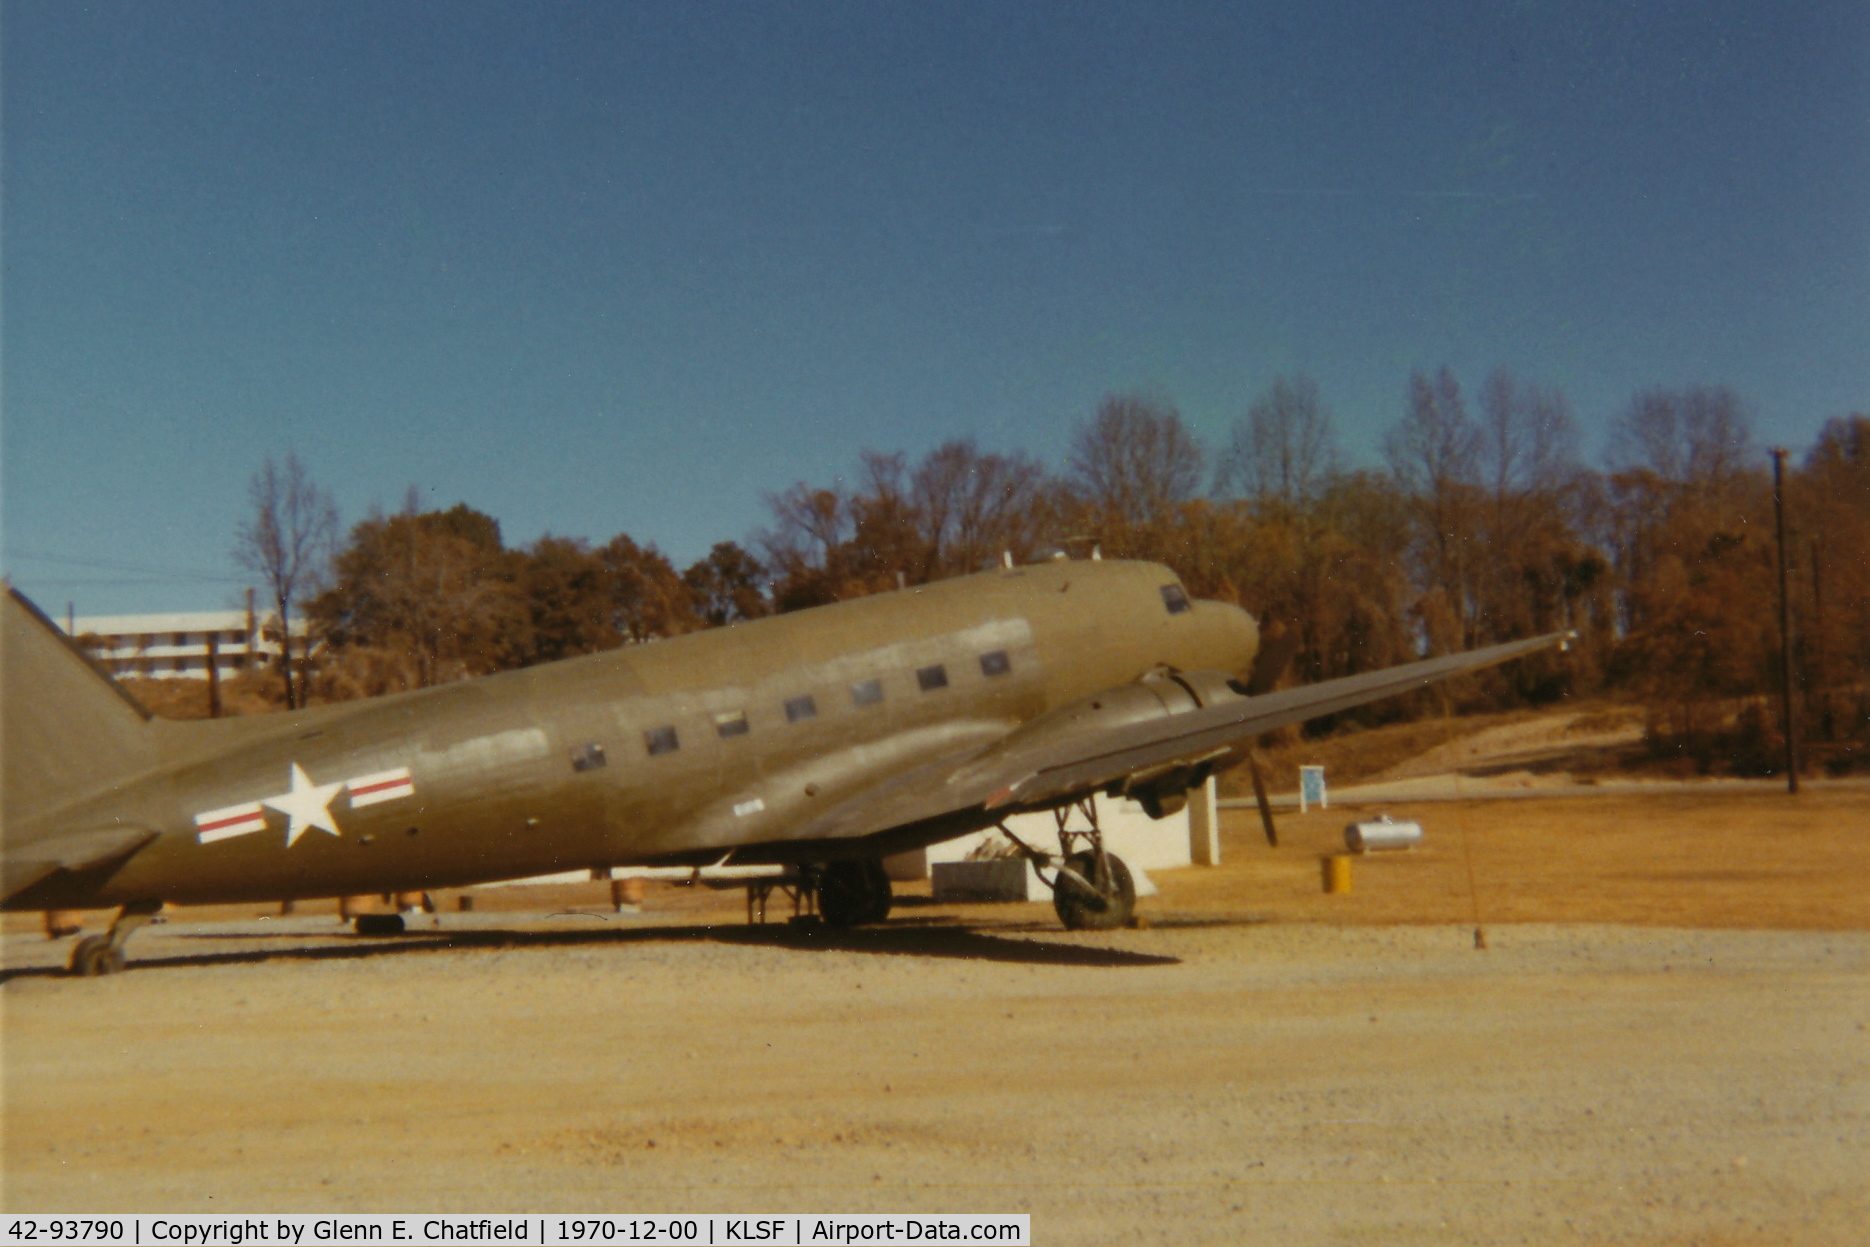 42-93790, 1942 Douglas C-47A-25-DK Skytrain C/N 13741, I shot this with an Instamatic 126 while I was in jump school.  It was later moved from the airfield NE to the National Infantry Museum where it is now located.